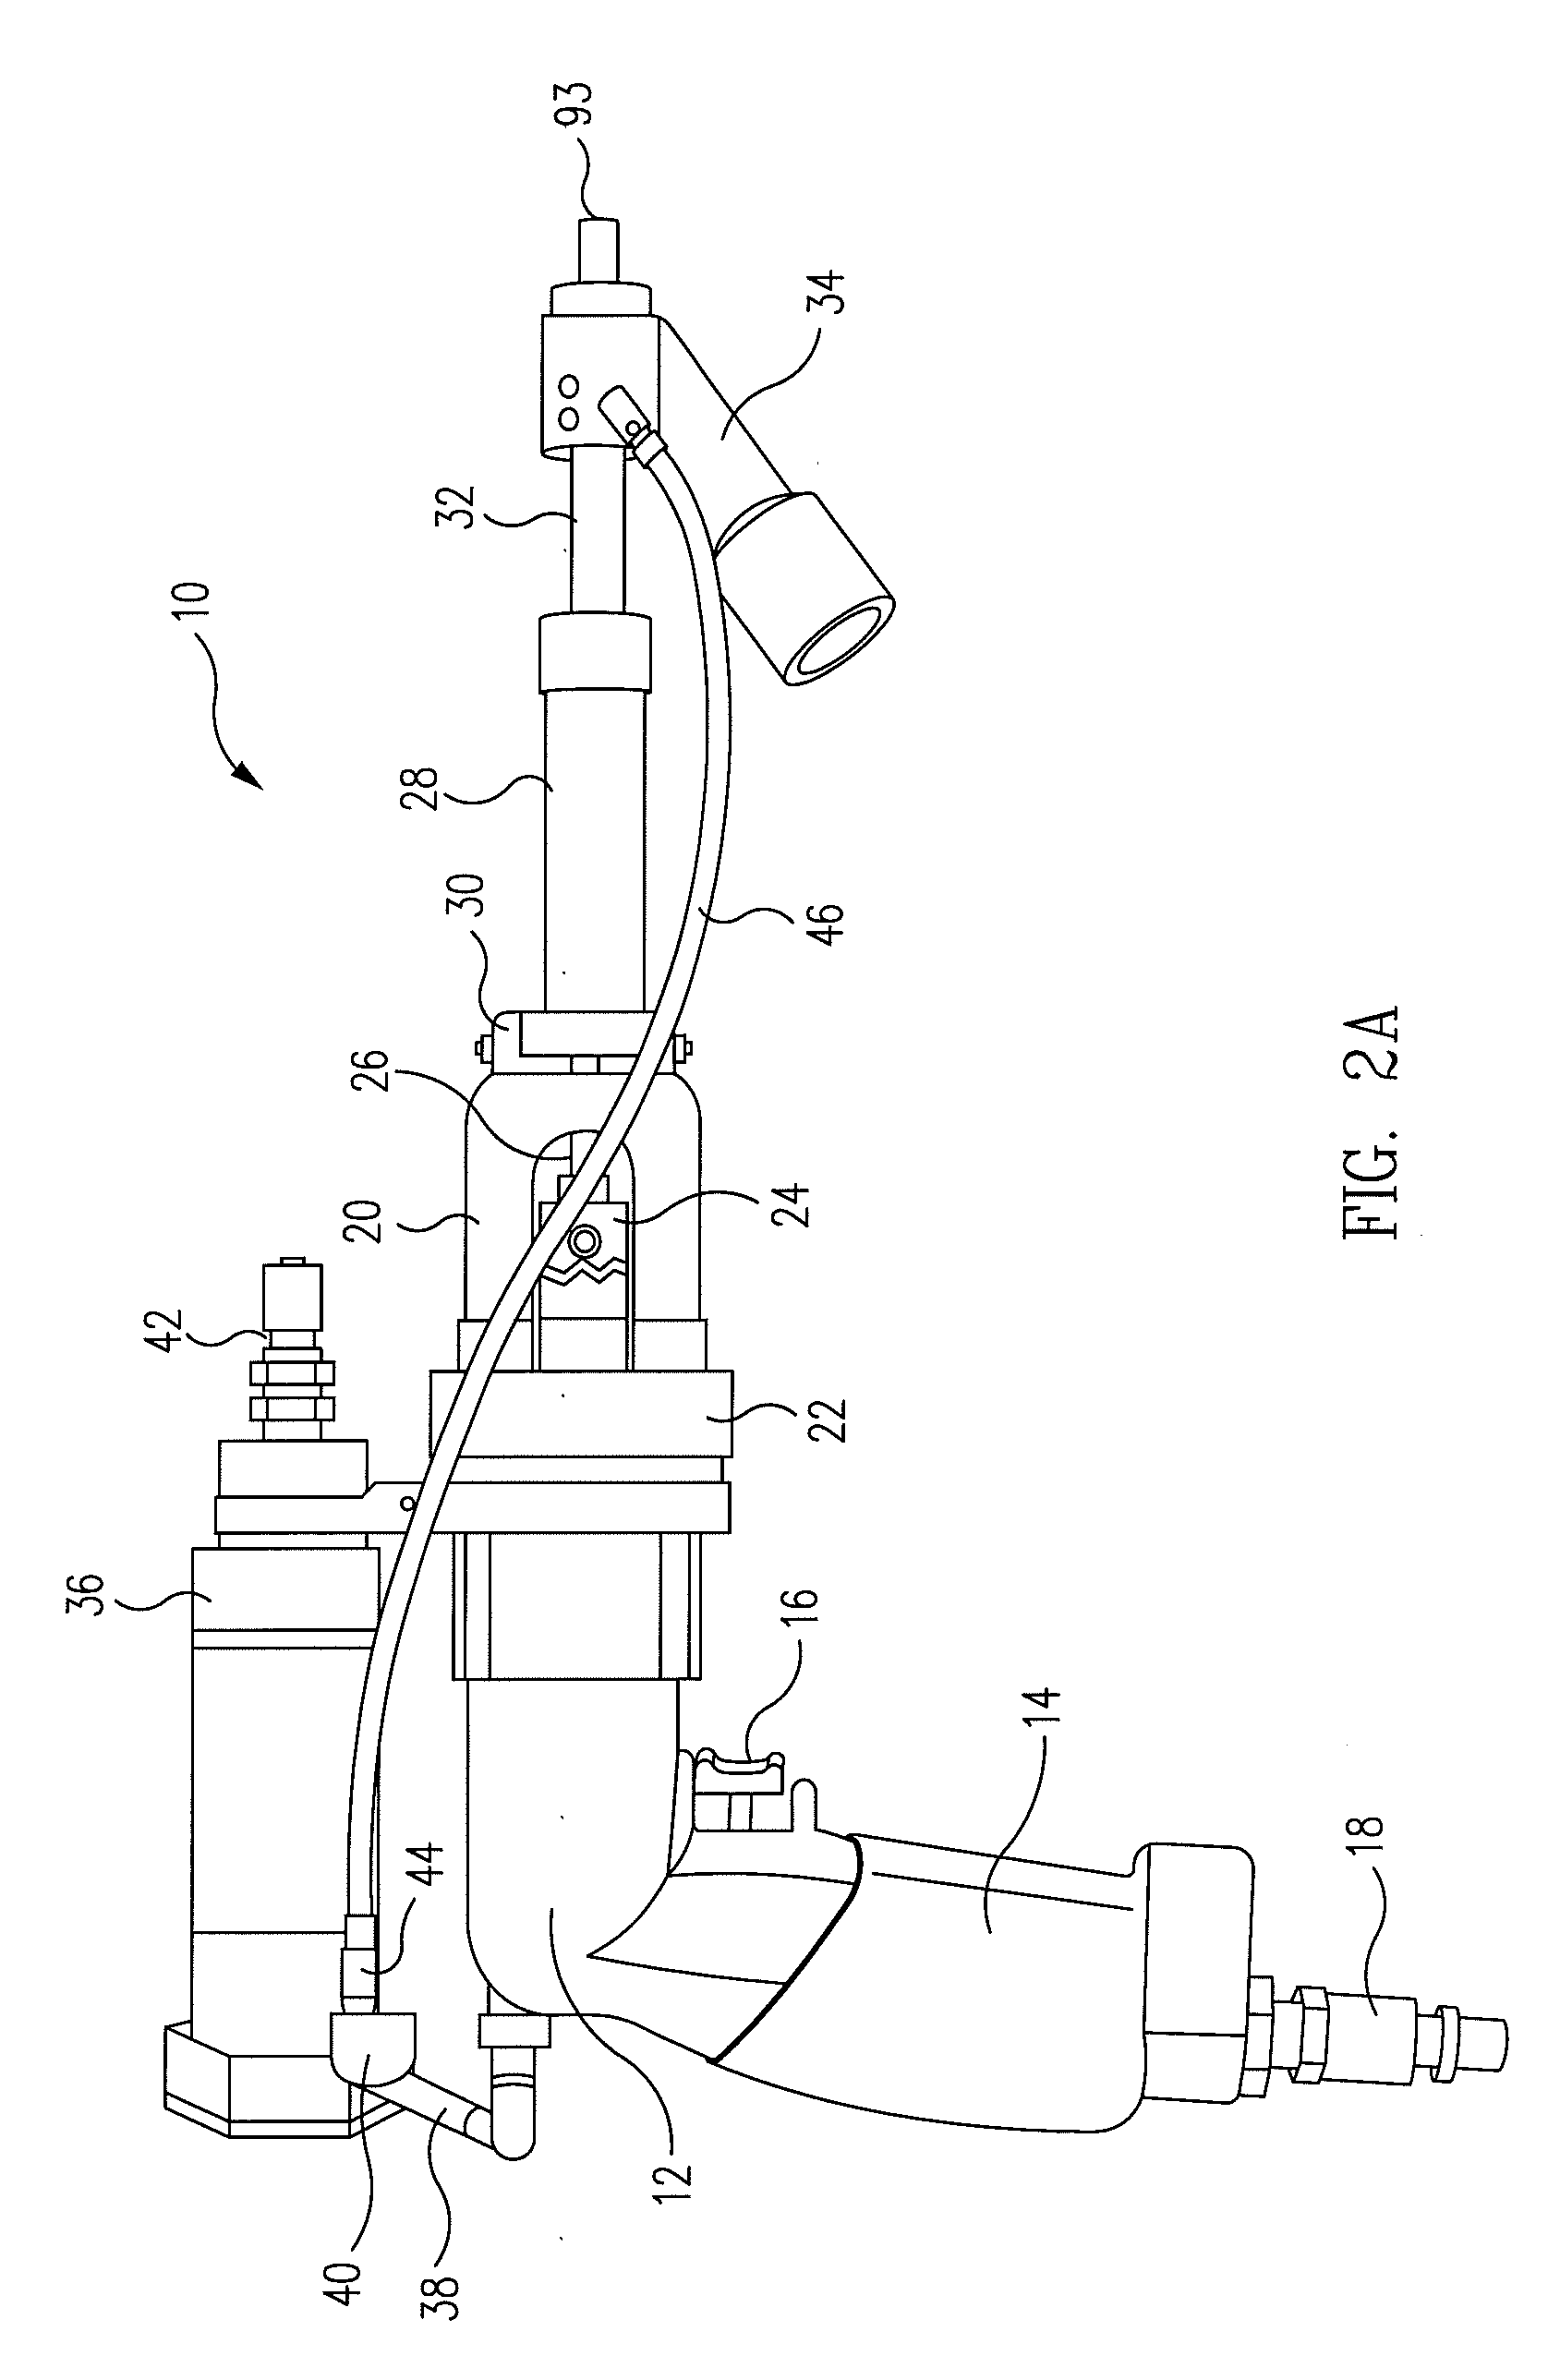 High speed hand drill with swiveling pressure foot and integrated vacuum pickup and coolant delivery duct